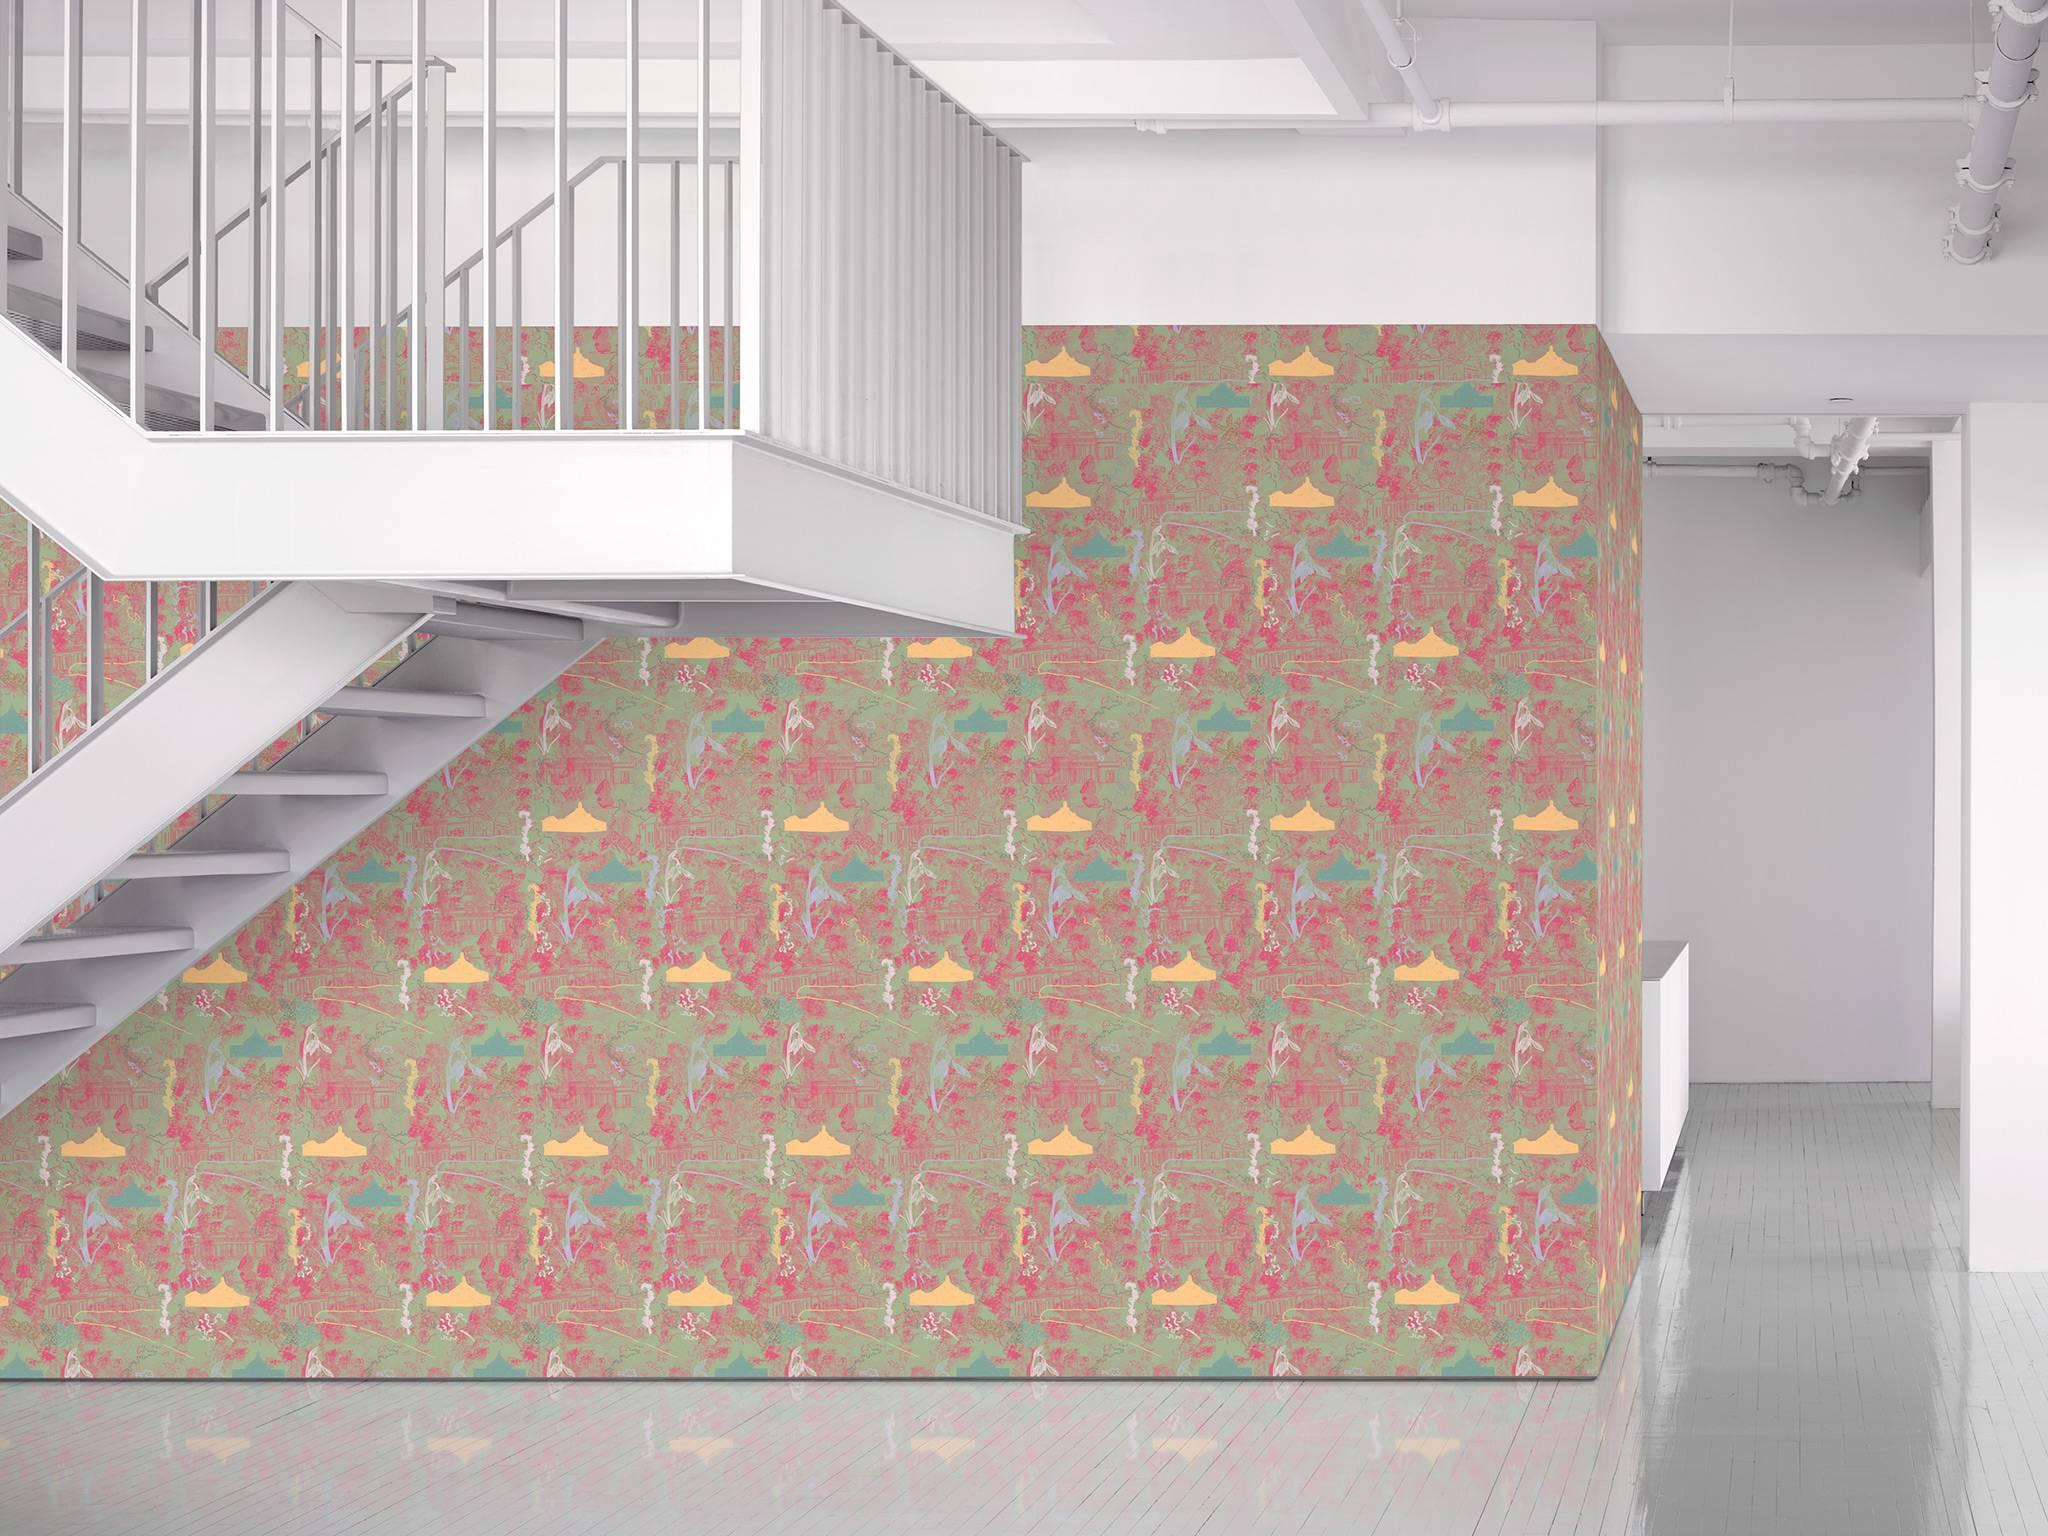 Maharam serpentine galleries wallpaper
Pavilion by Marc Camille Chaimowicz
001 olive

Marc Camille Chaimowicz was among the first to merge performance and installation art. London- and Burgundy-based, he’s known for theatrical installations that